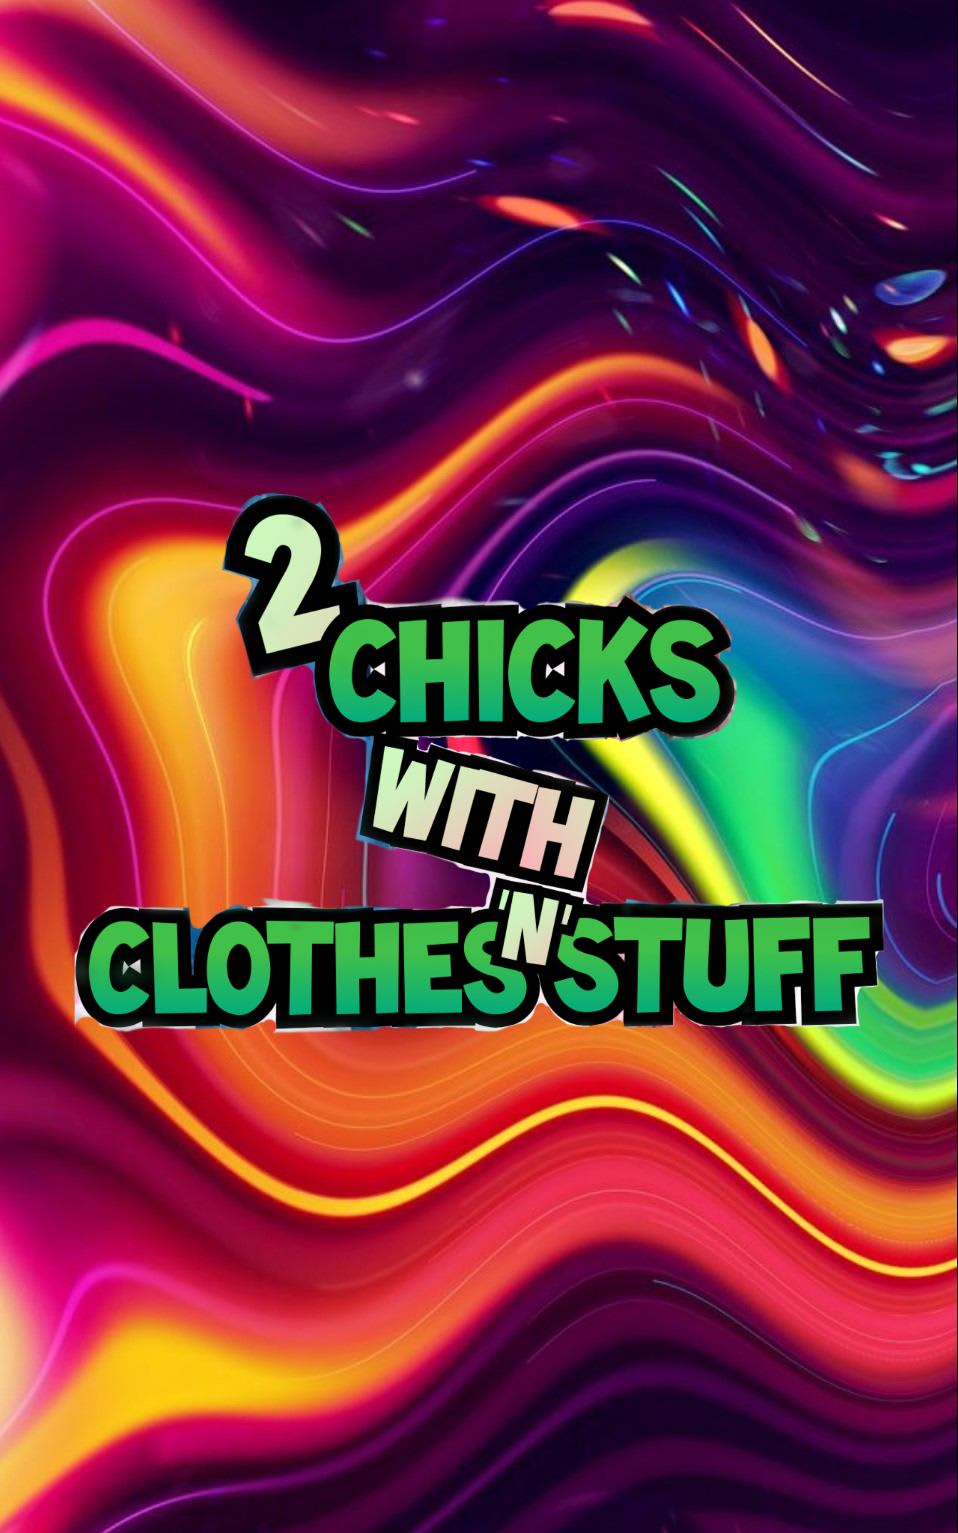 2 Chicks With Clothes 'N' Stuff